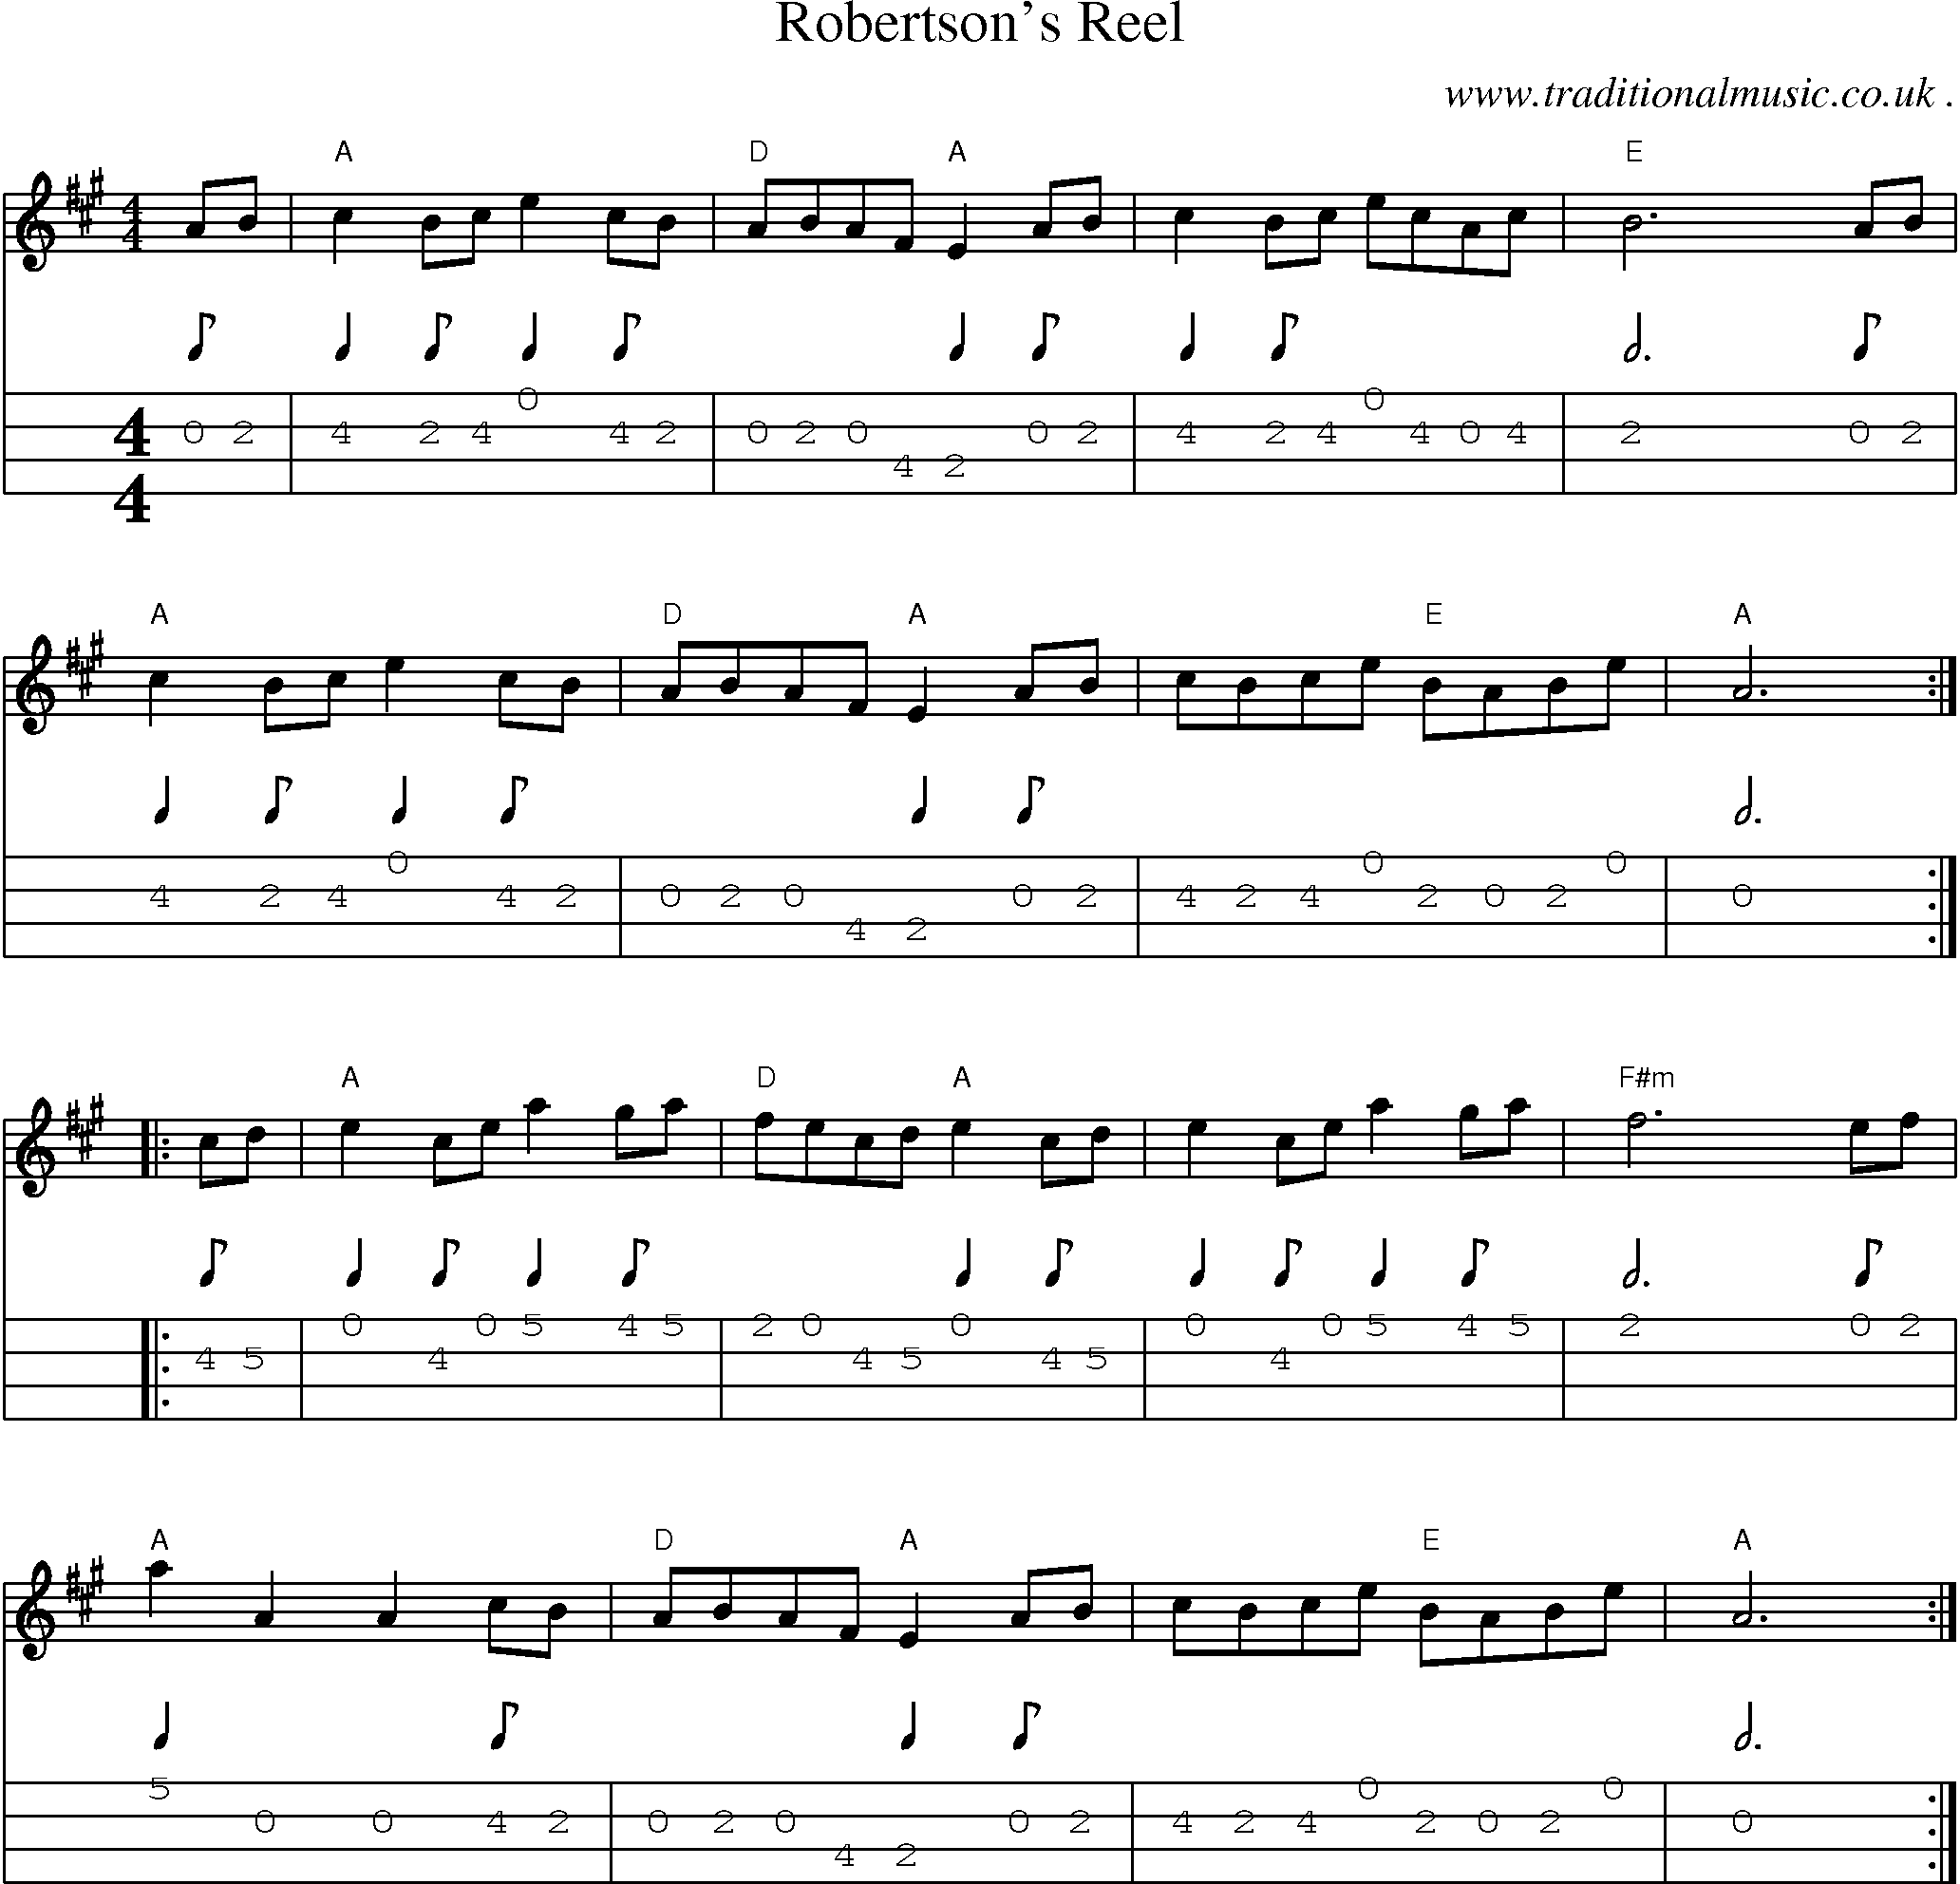 Music Score and Guitar Tabs for Robertsons Reel